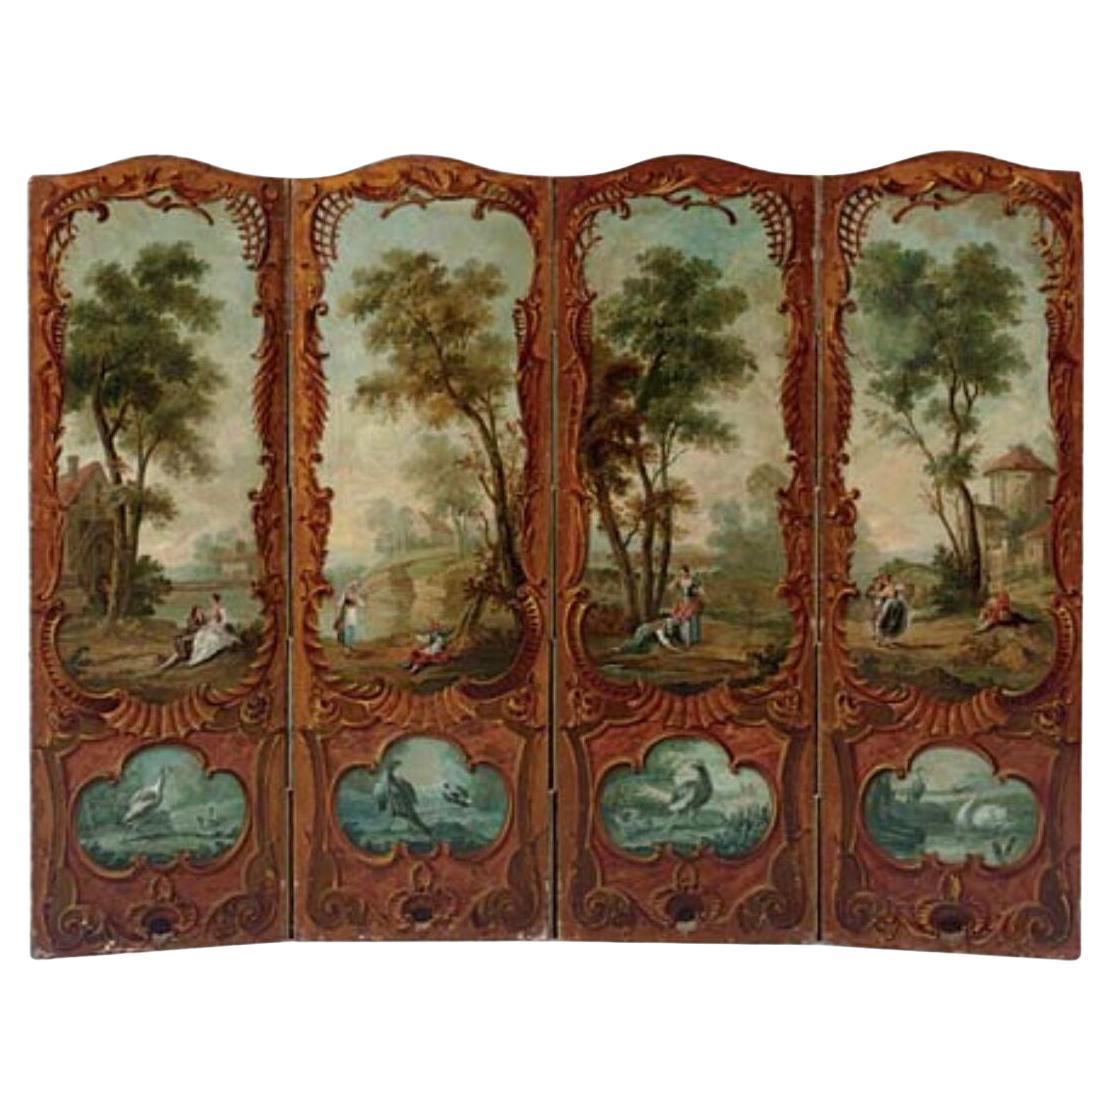 German Rococo Four Panel Painted Screen, Mid-18th Century For Sale